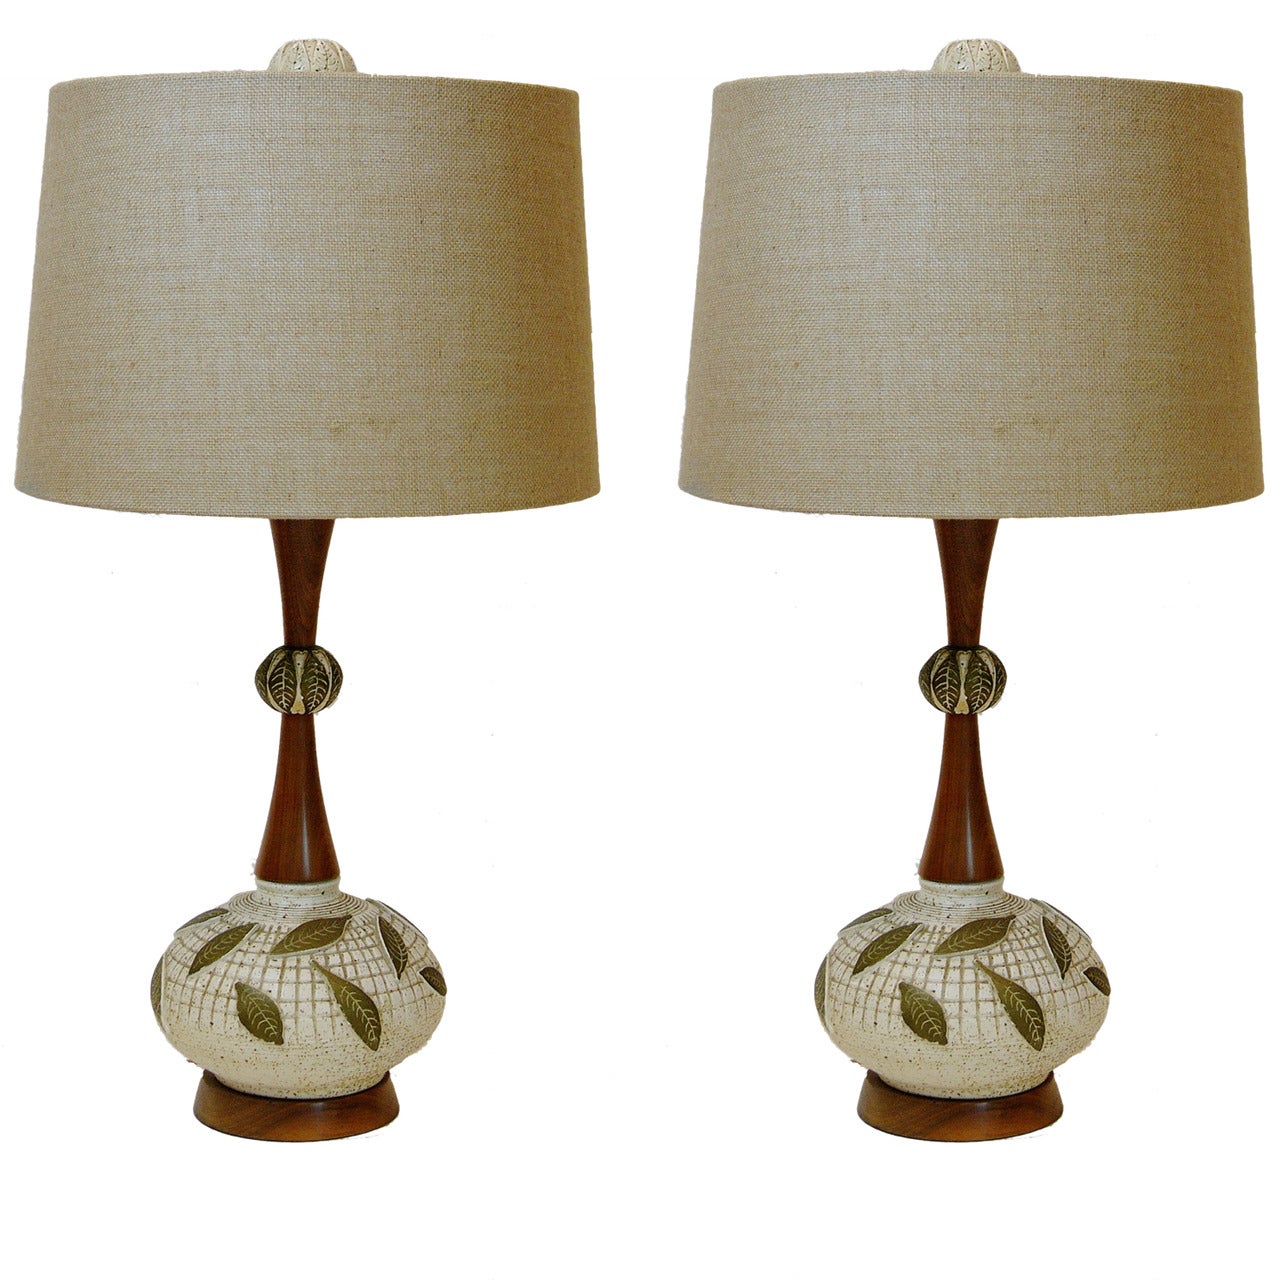 Pair of Mid-Century Modern Walnut and Ceramic Lamps